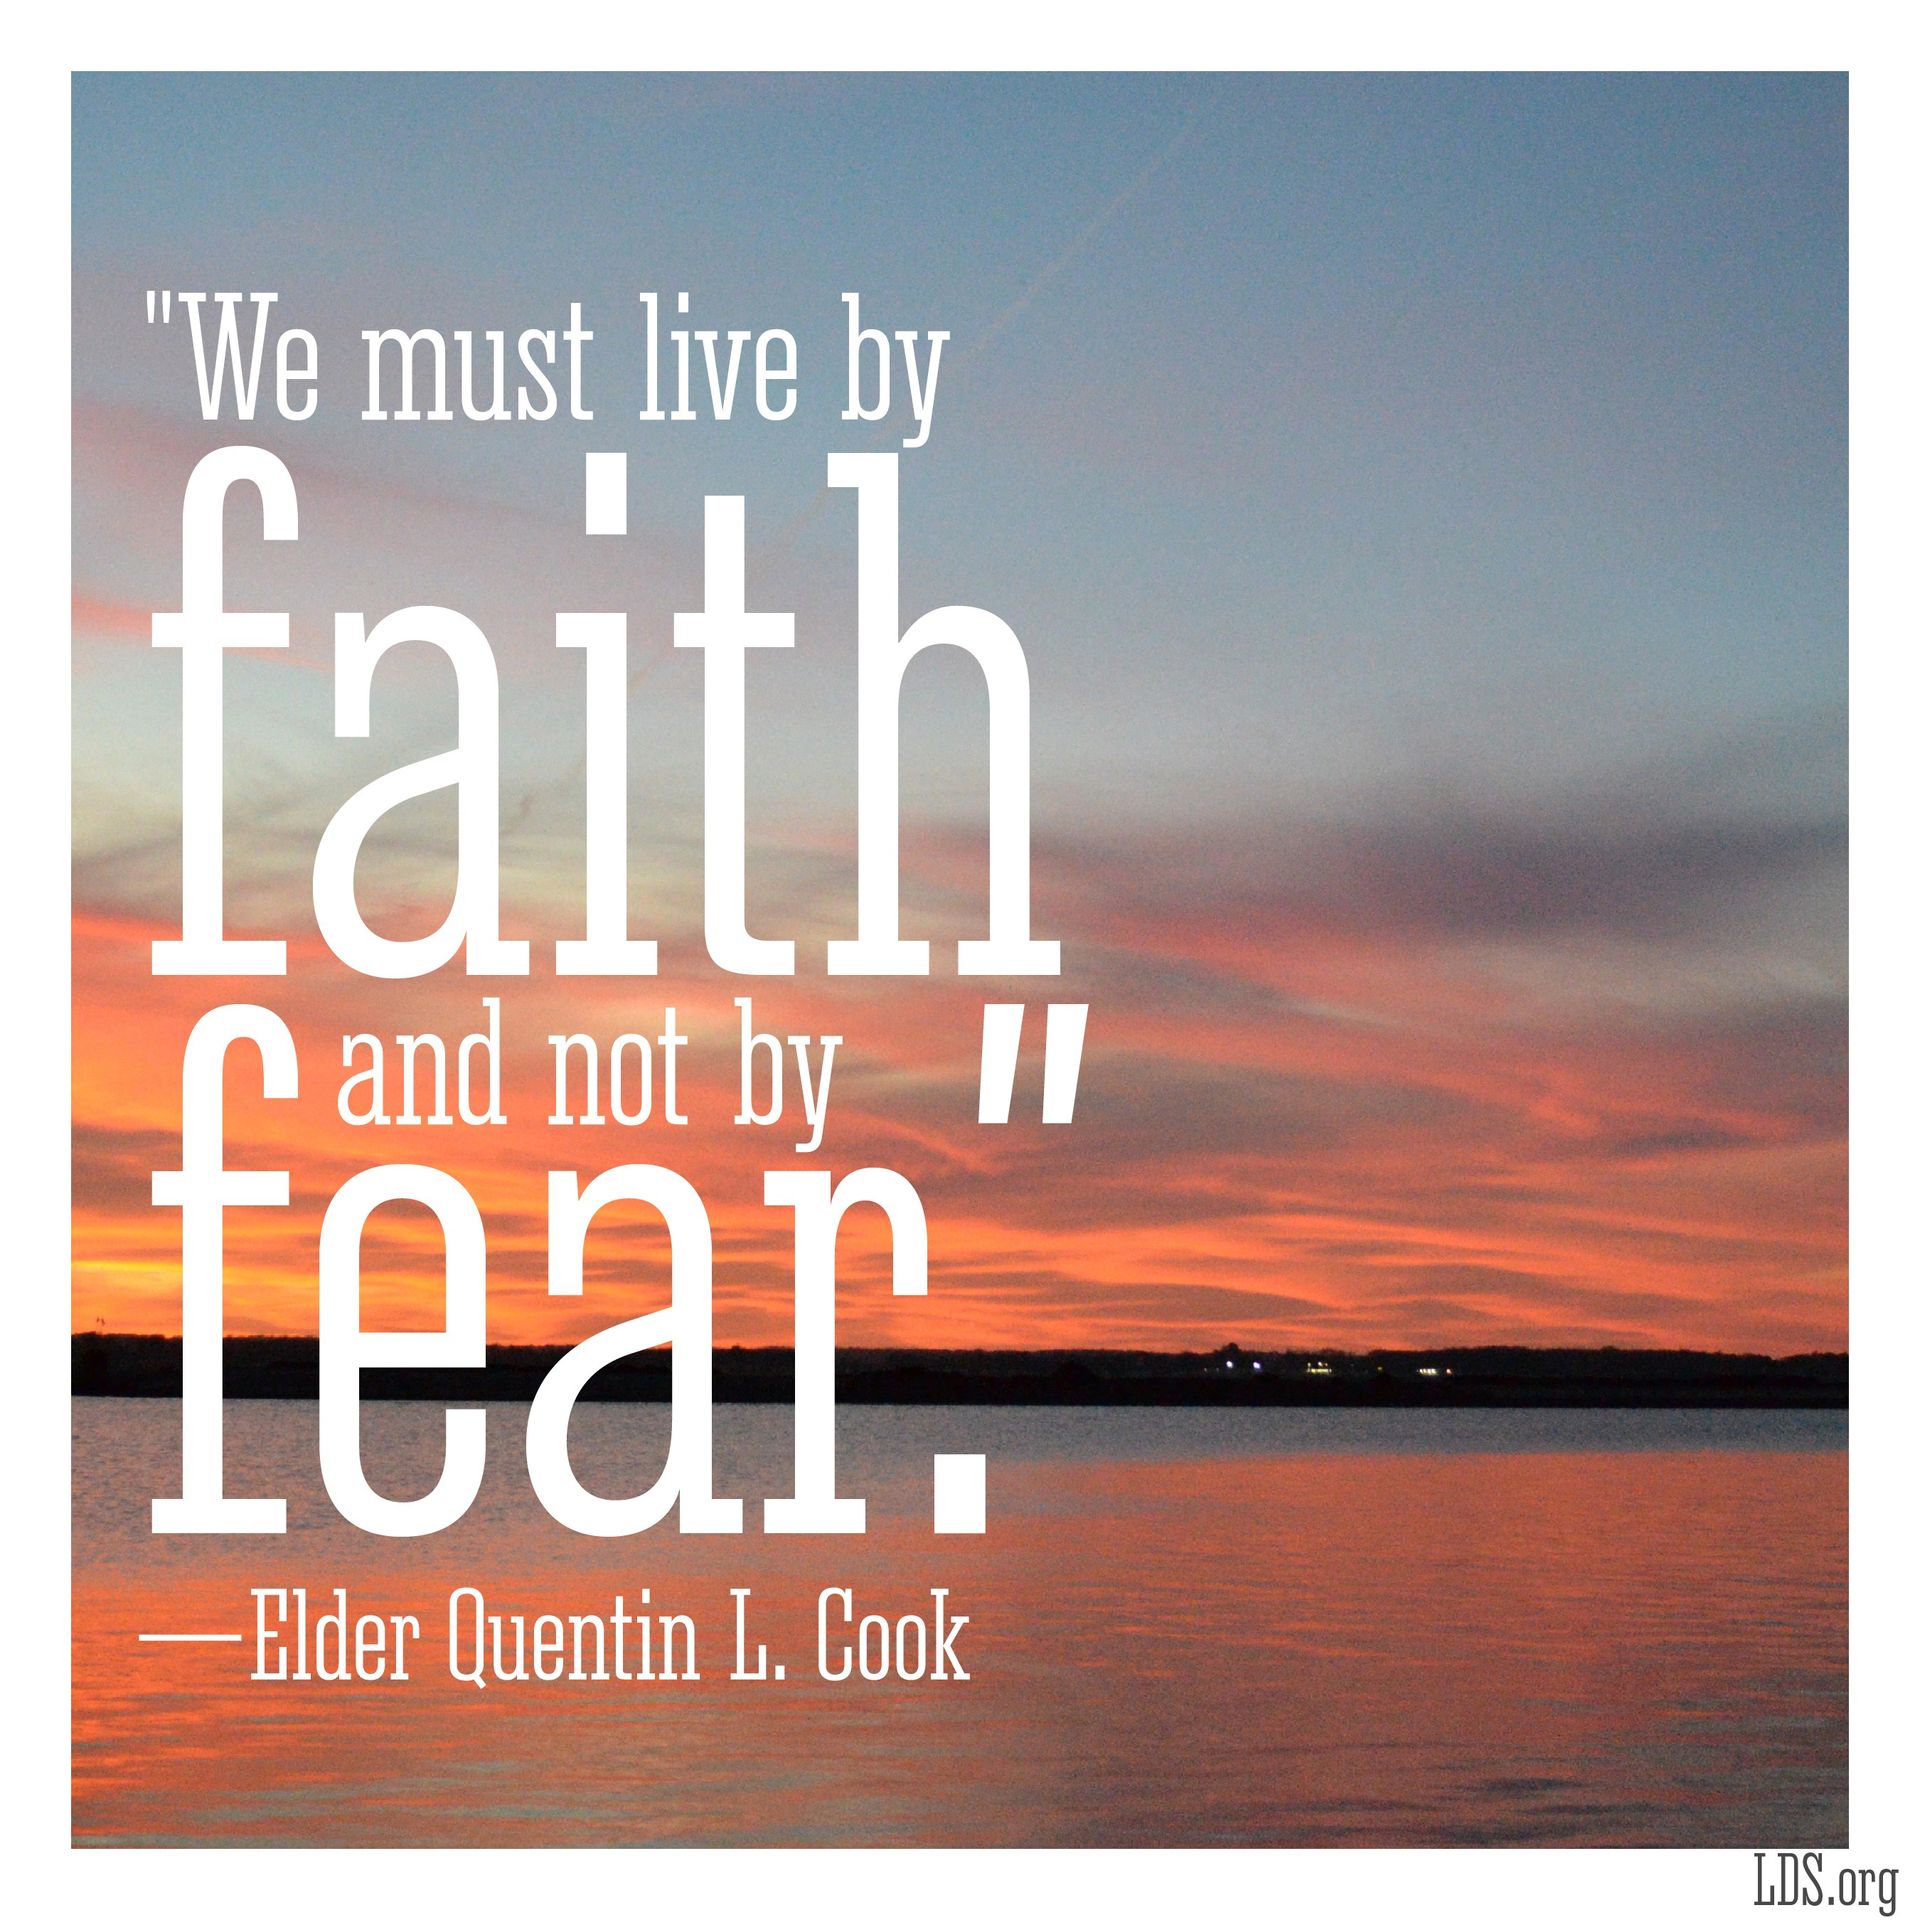 “We must live by faith and not by fear.”—Elder Quentin L. Cook, “Live by Faith and Not by Fear”